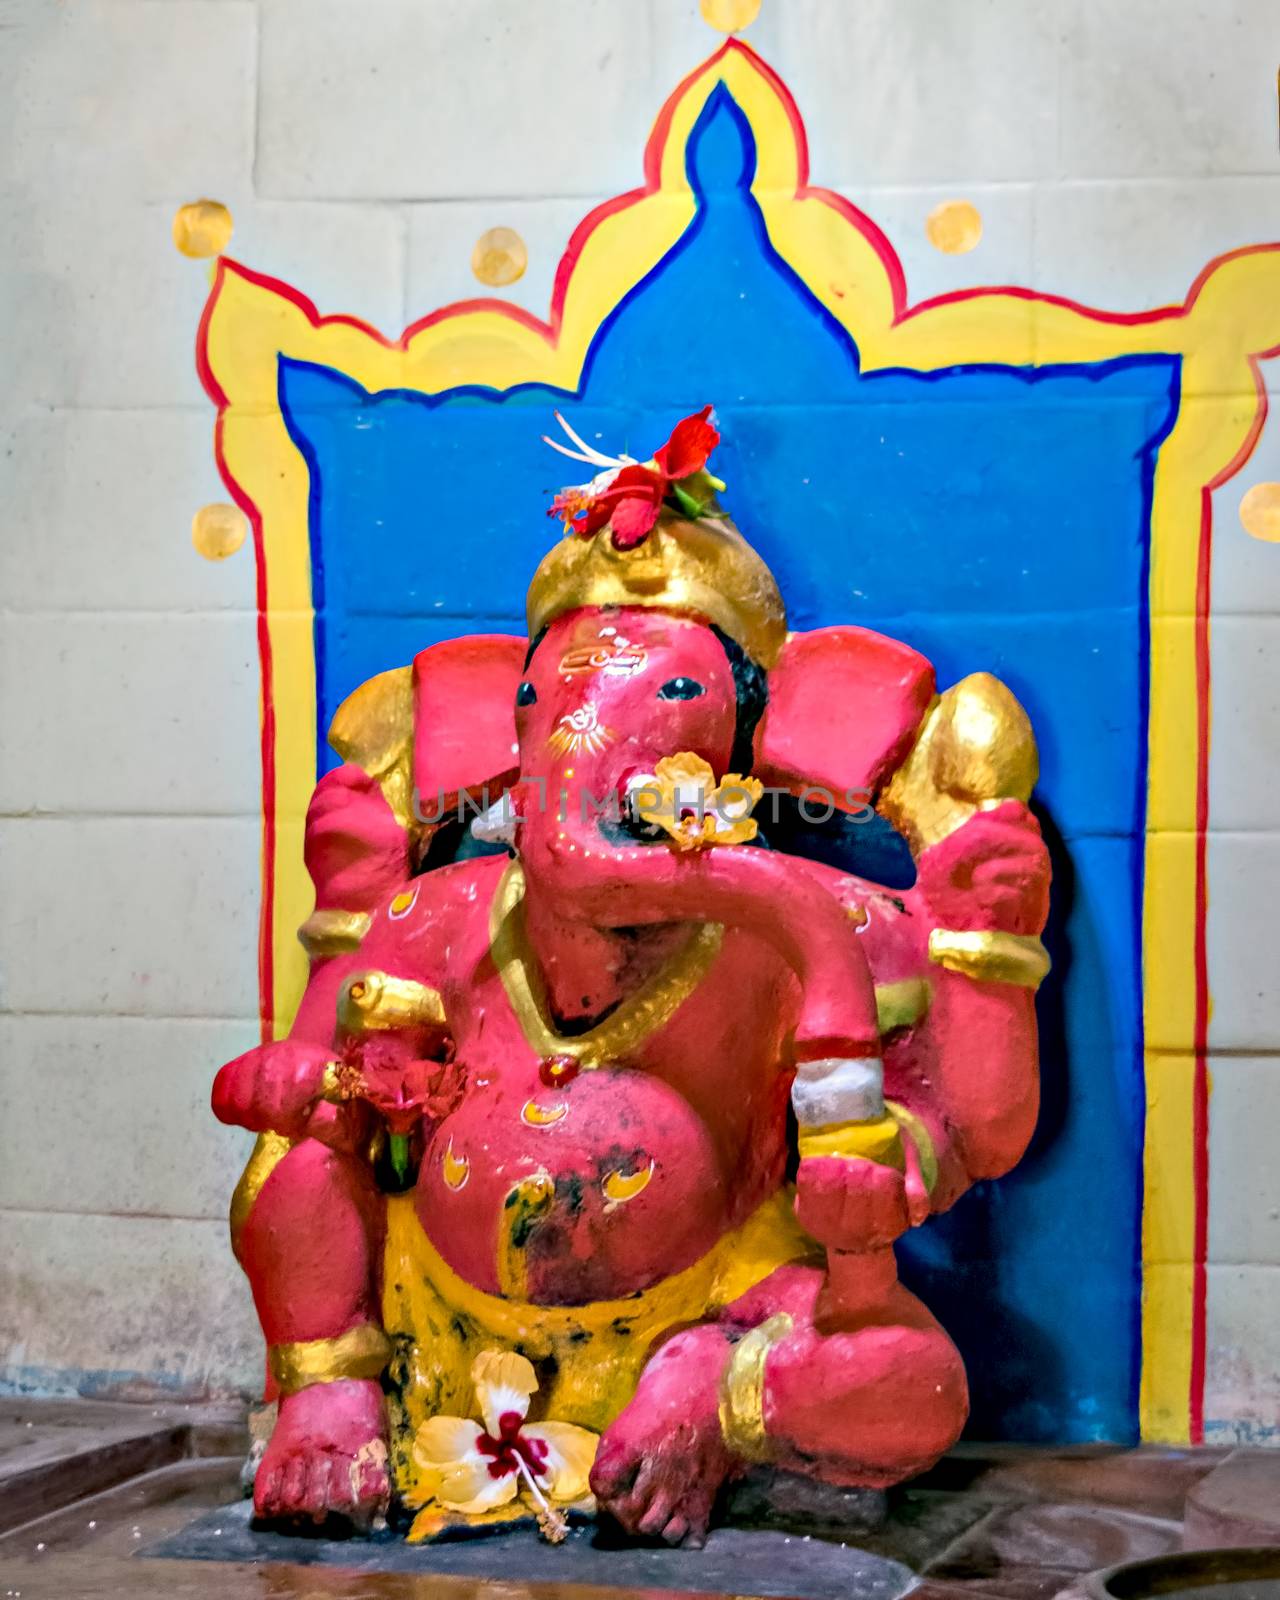 Close up image of red colored Lord ganesha idol at a temple in Velneshwar. by lalam